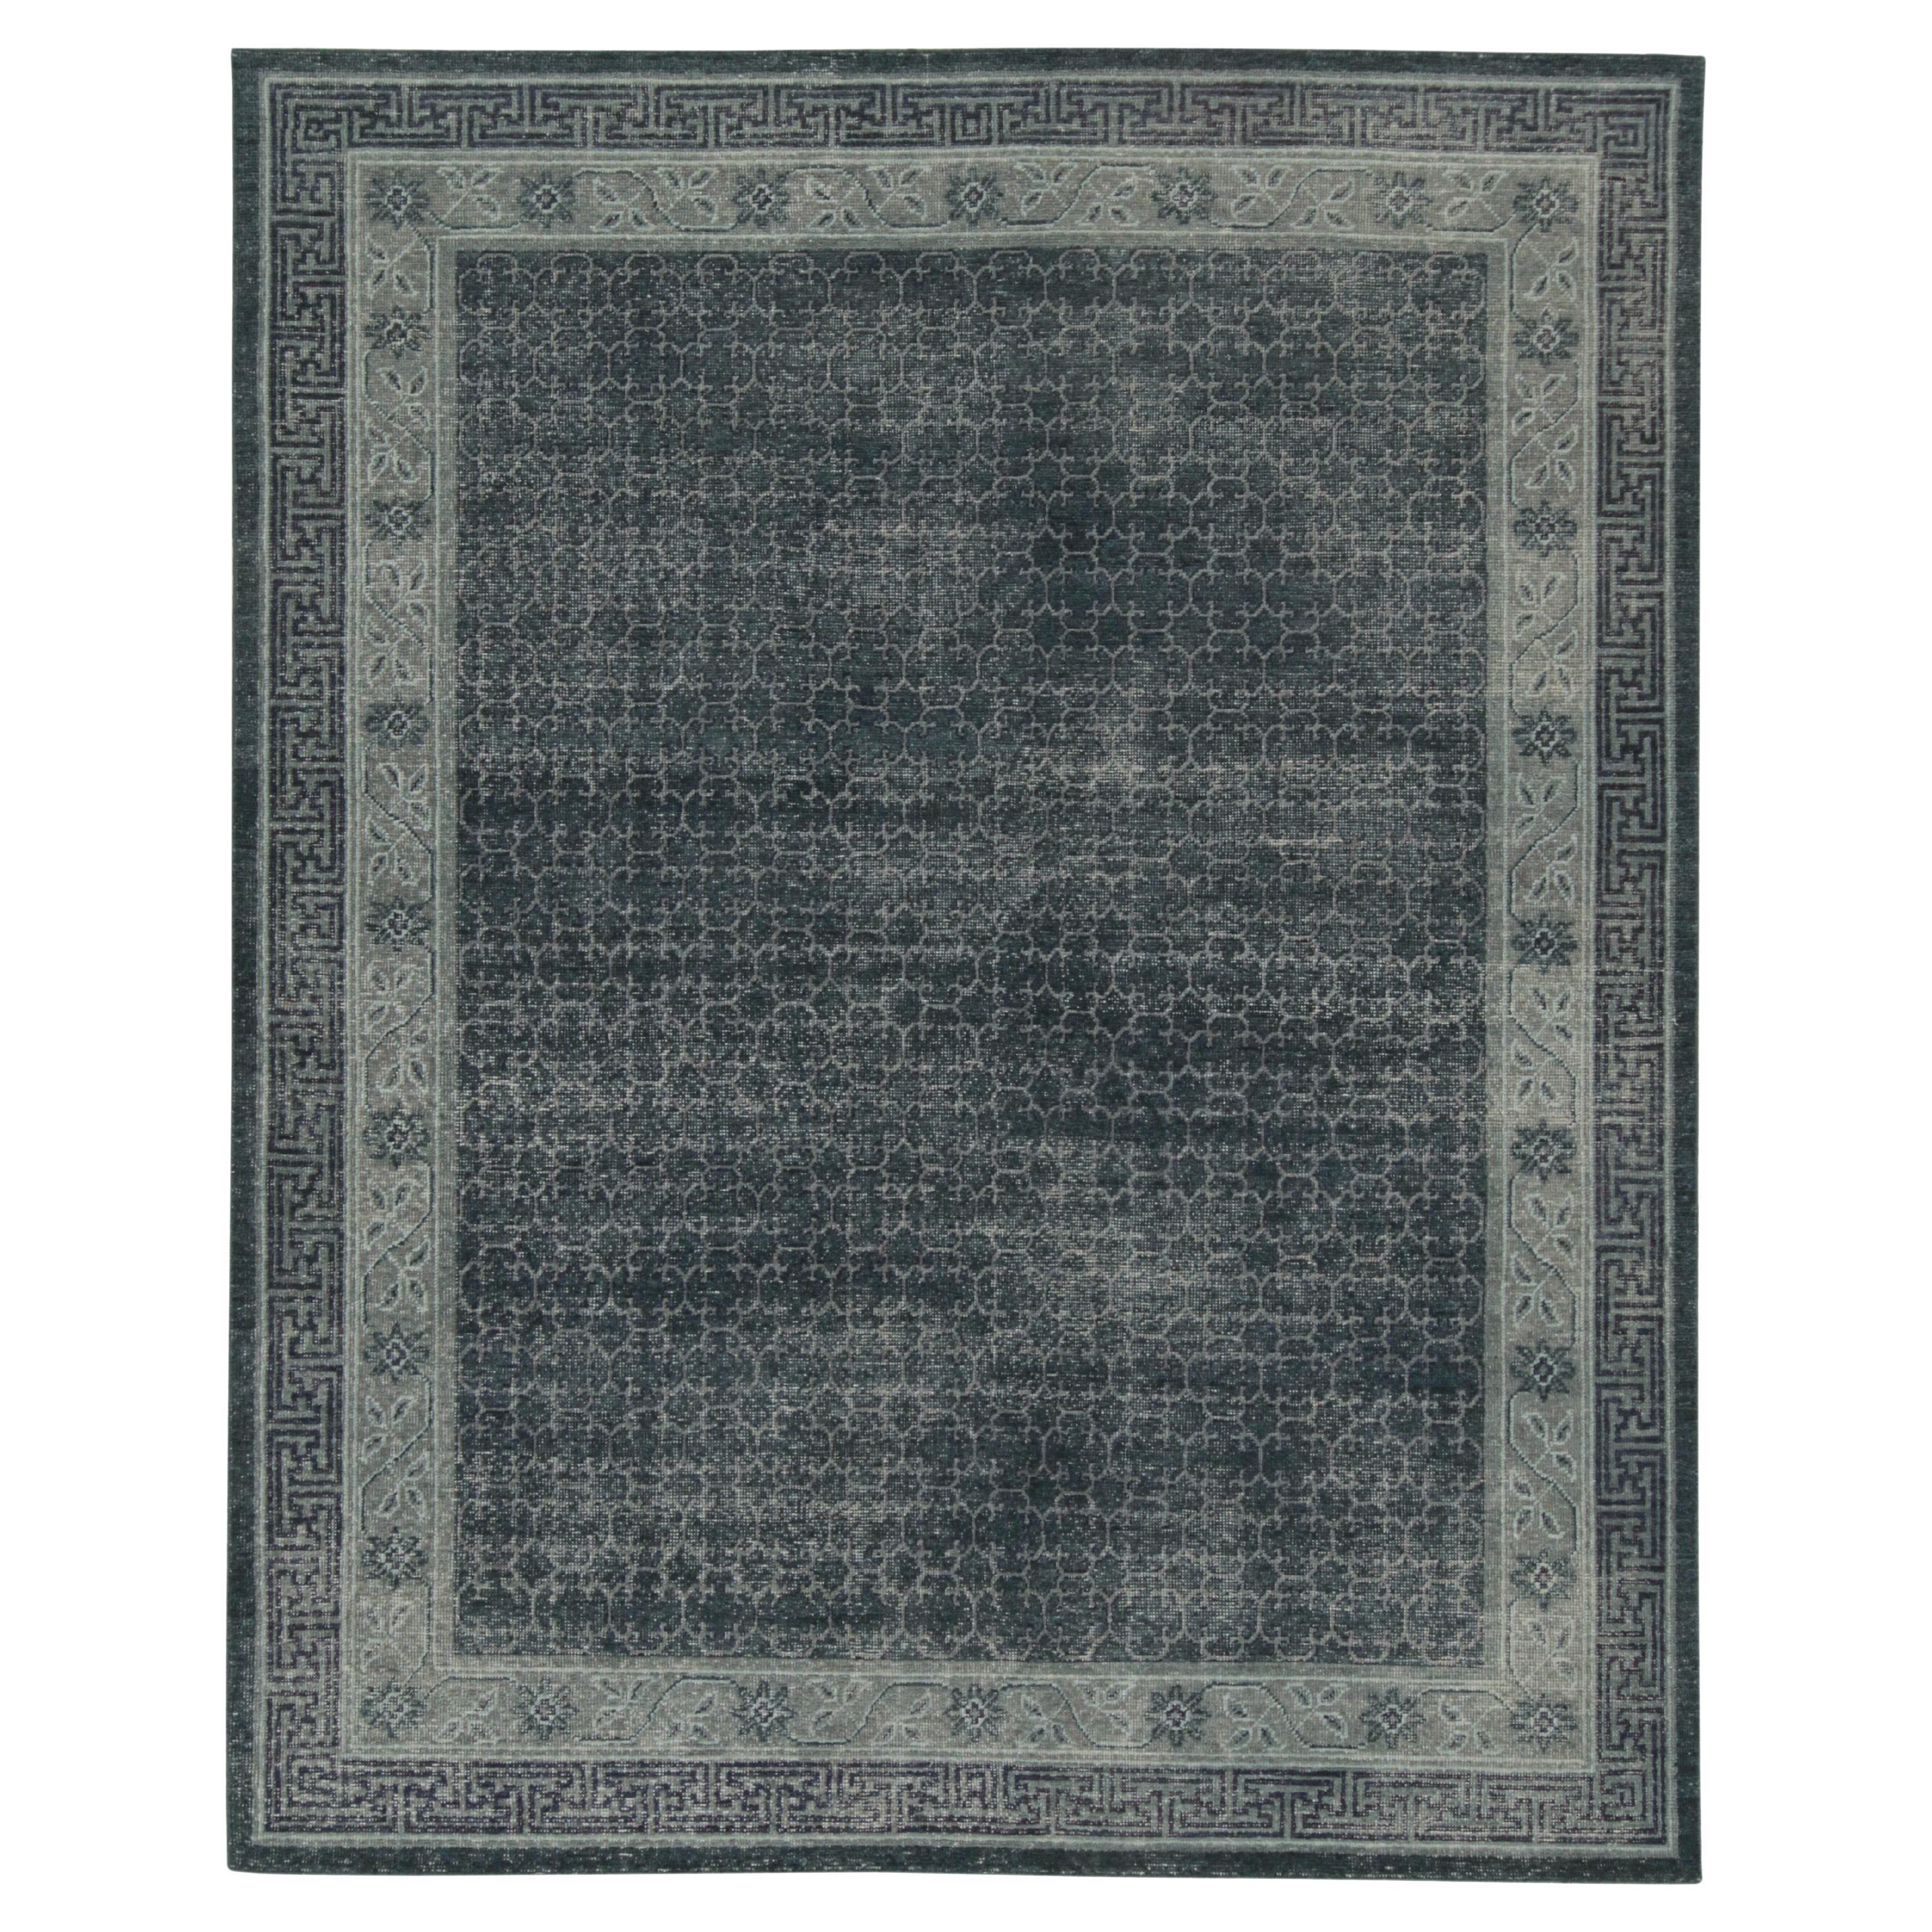 Rug & Kilim’s Distressed Khotan style rug in Blue & Gray Geometric Patterns For Sale